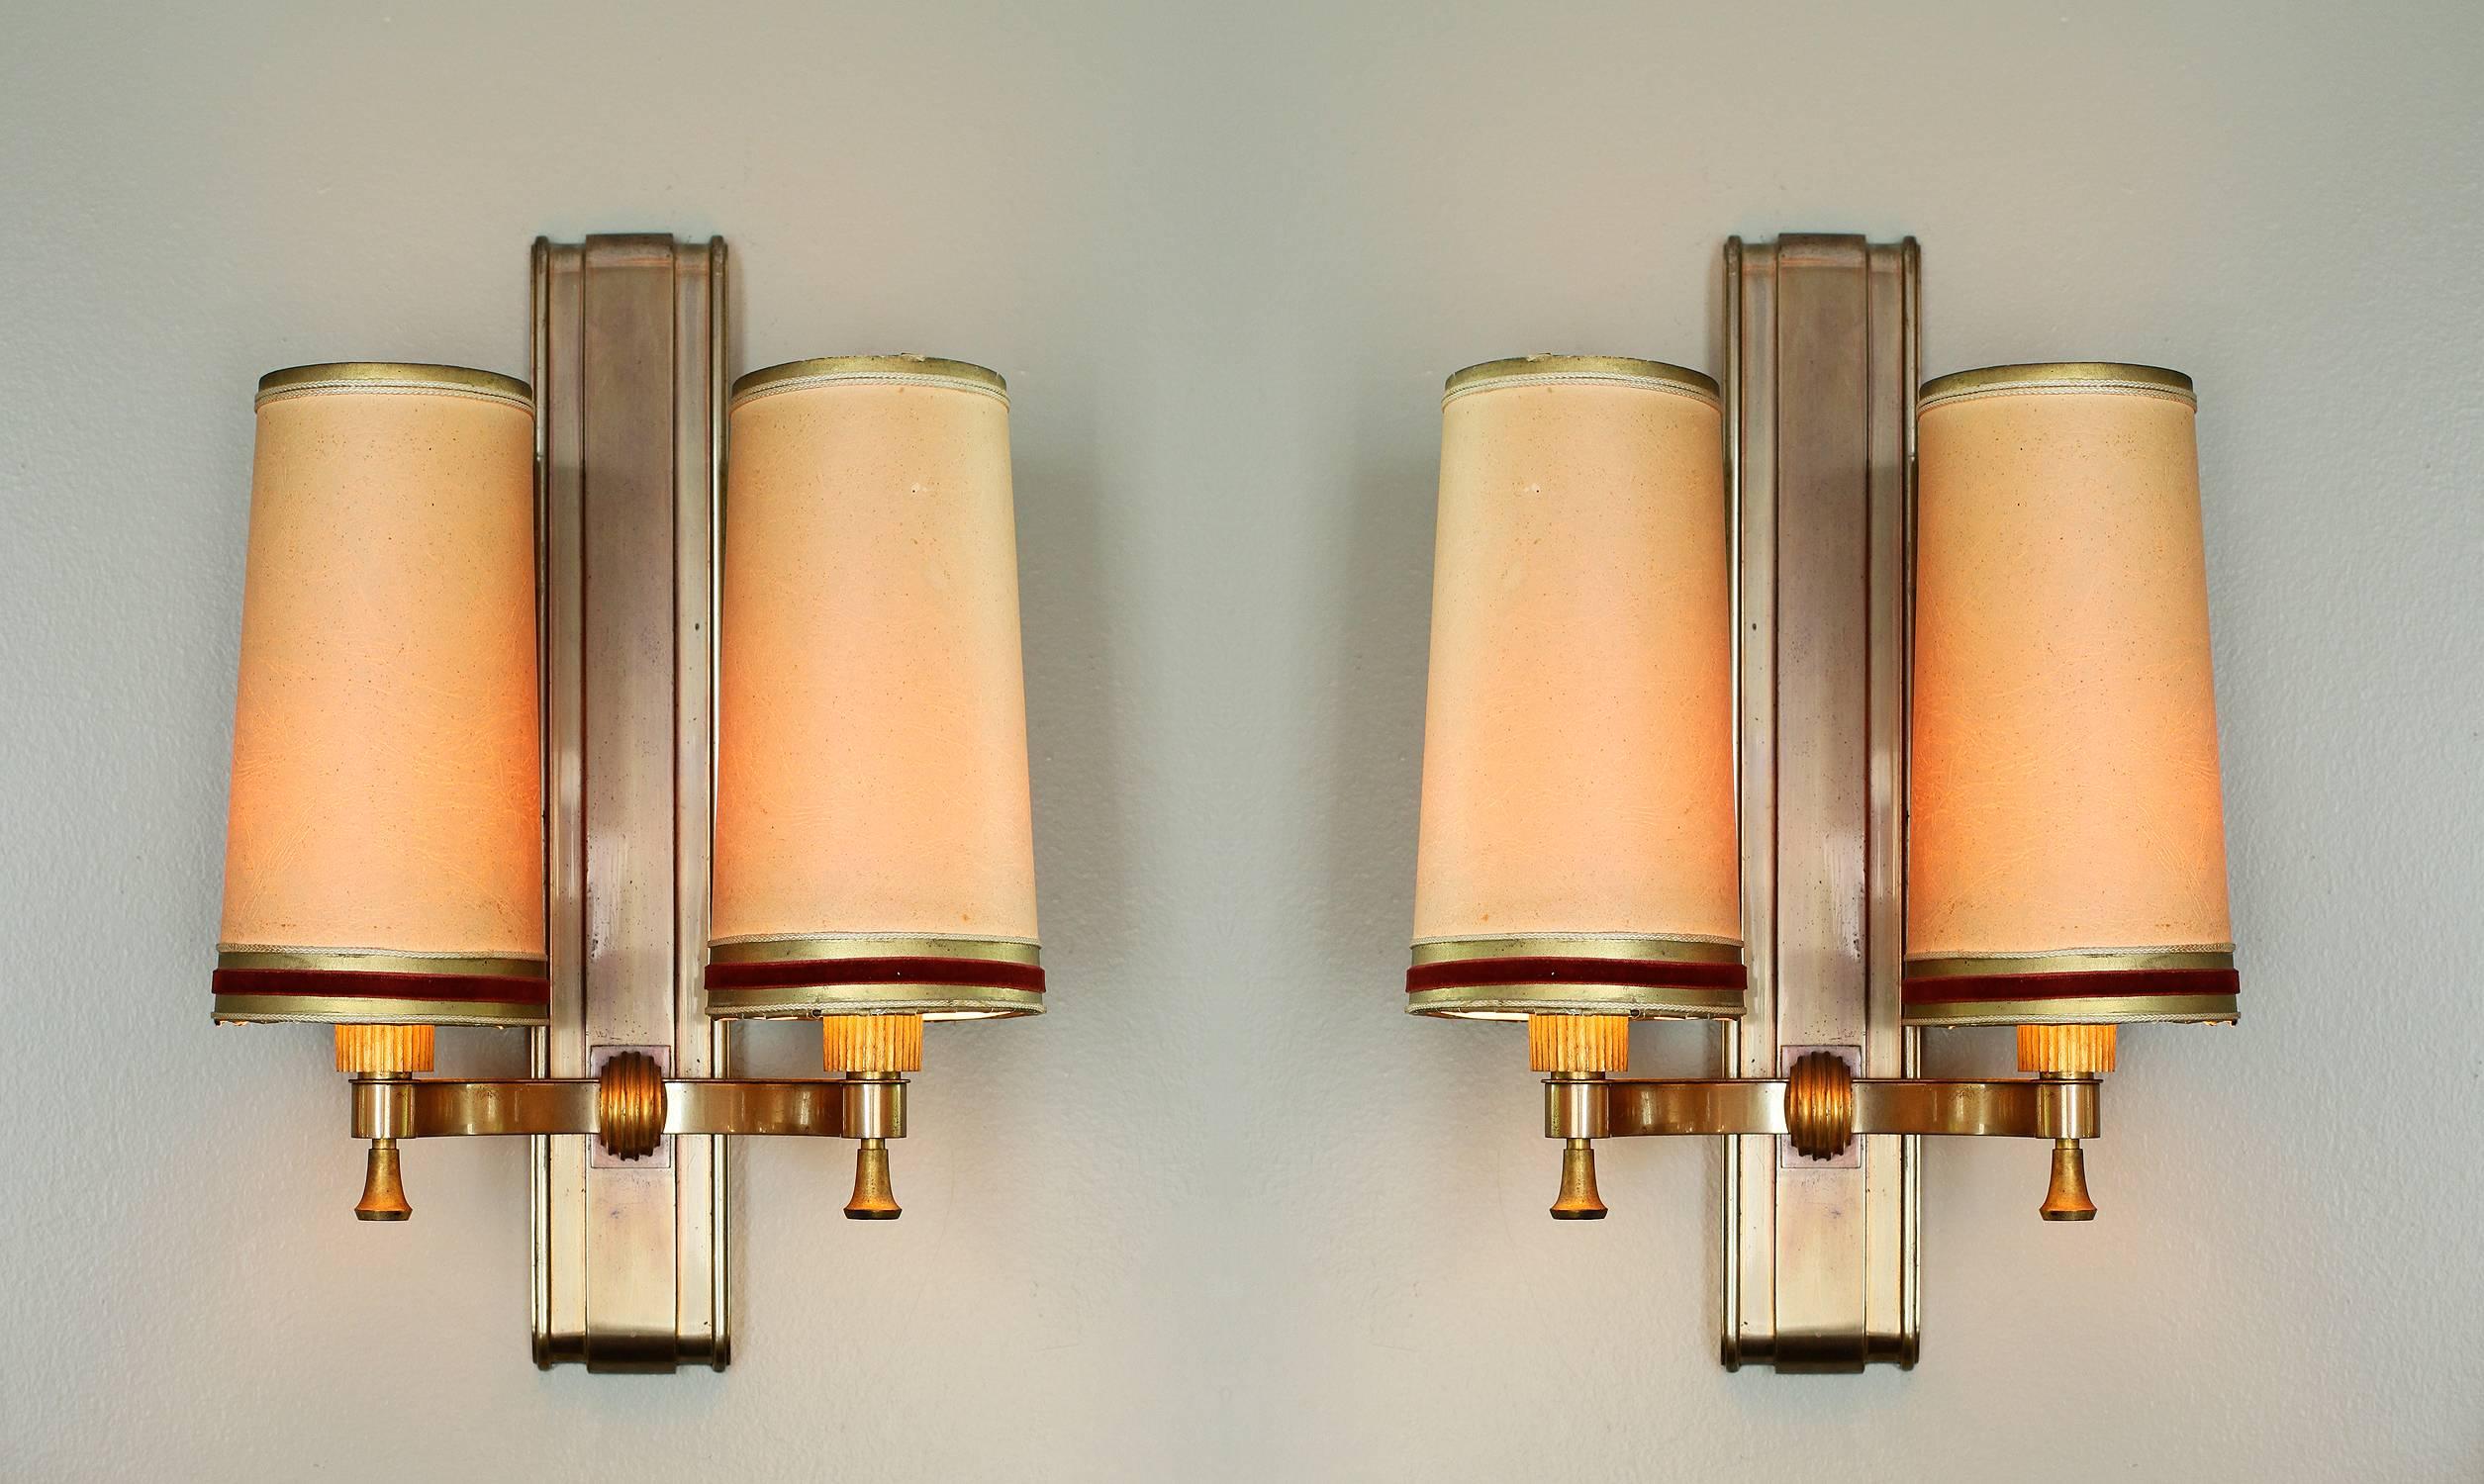 Maxime OLD (1910-1991).

An exceptional two tones of brass and patinated bronze lightly oxidized pair of sconces.
When the sconces are turned ON at night different colors of the bronze appear to make visible the different patinas,

France,